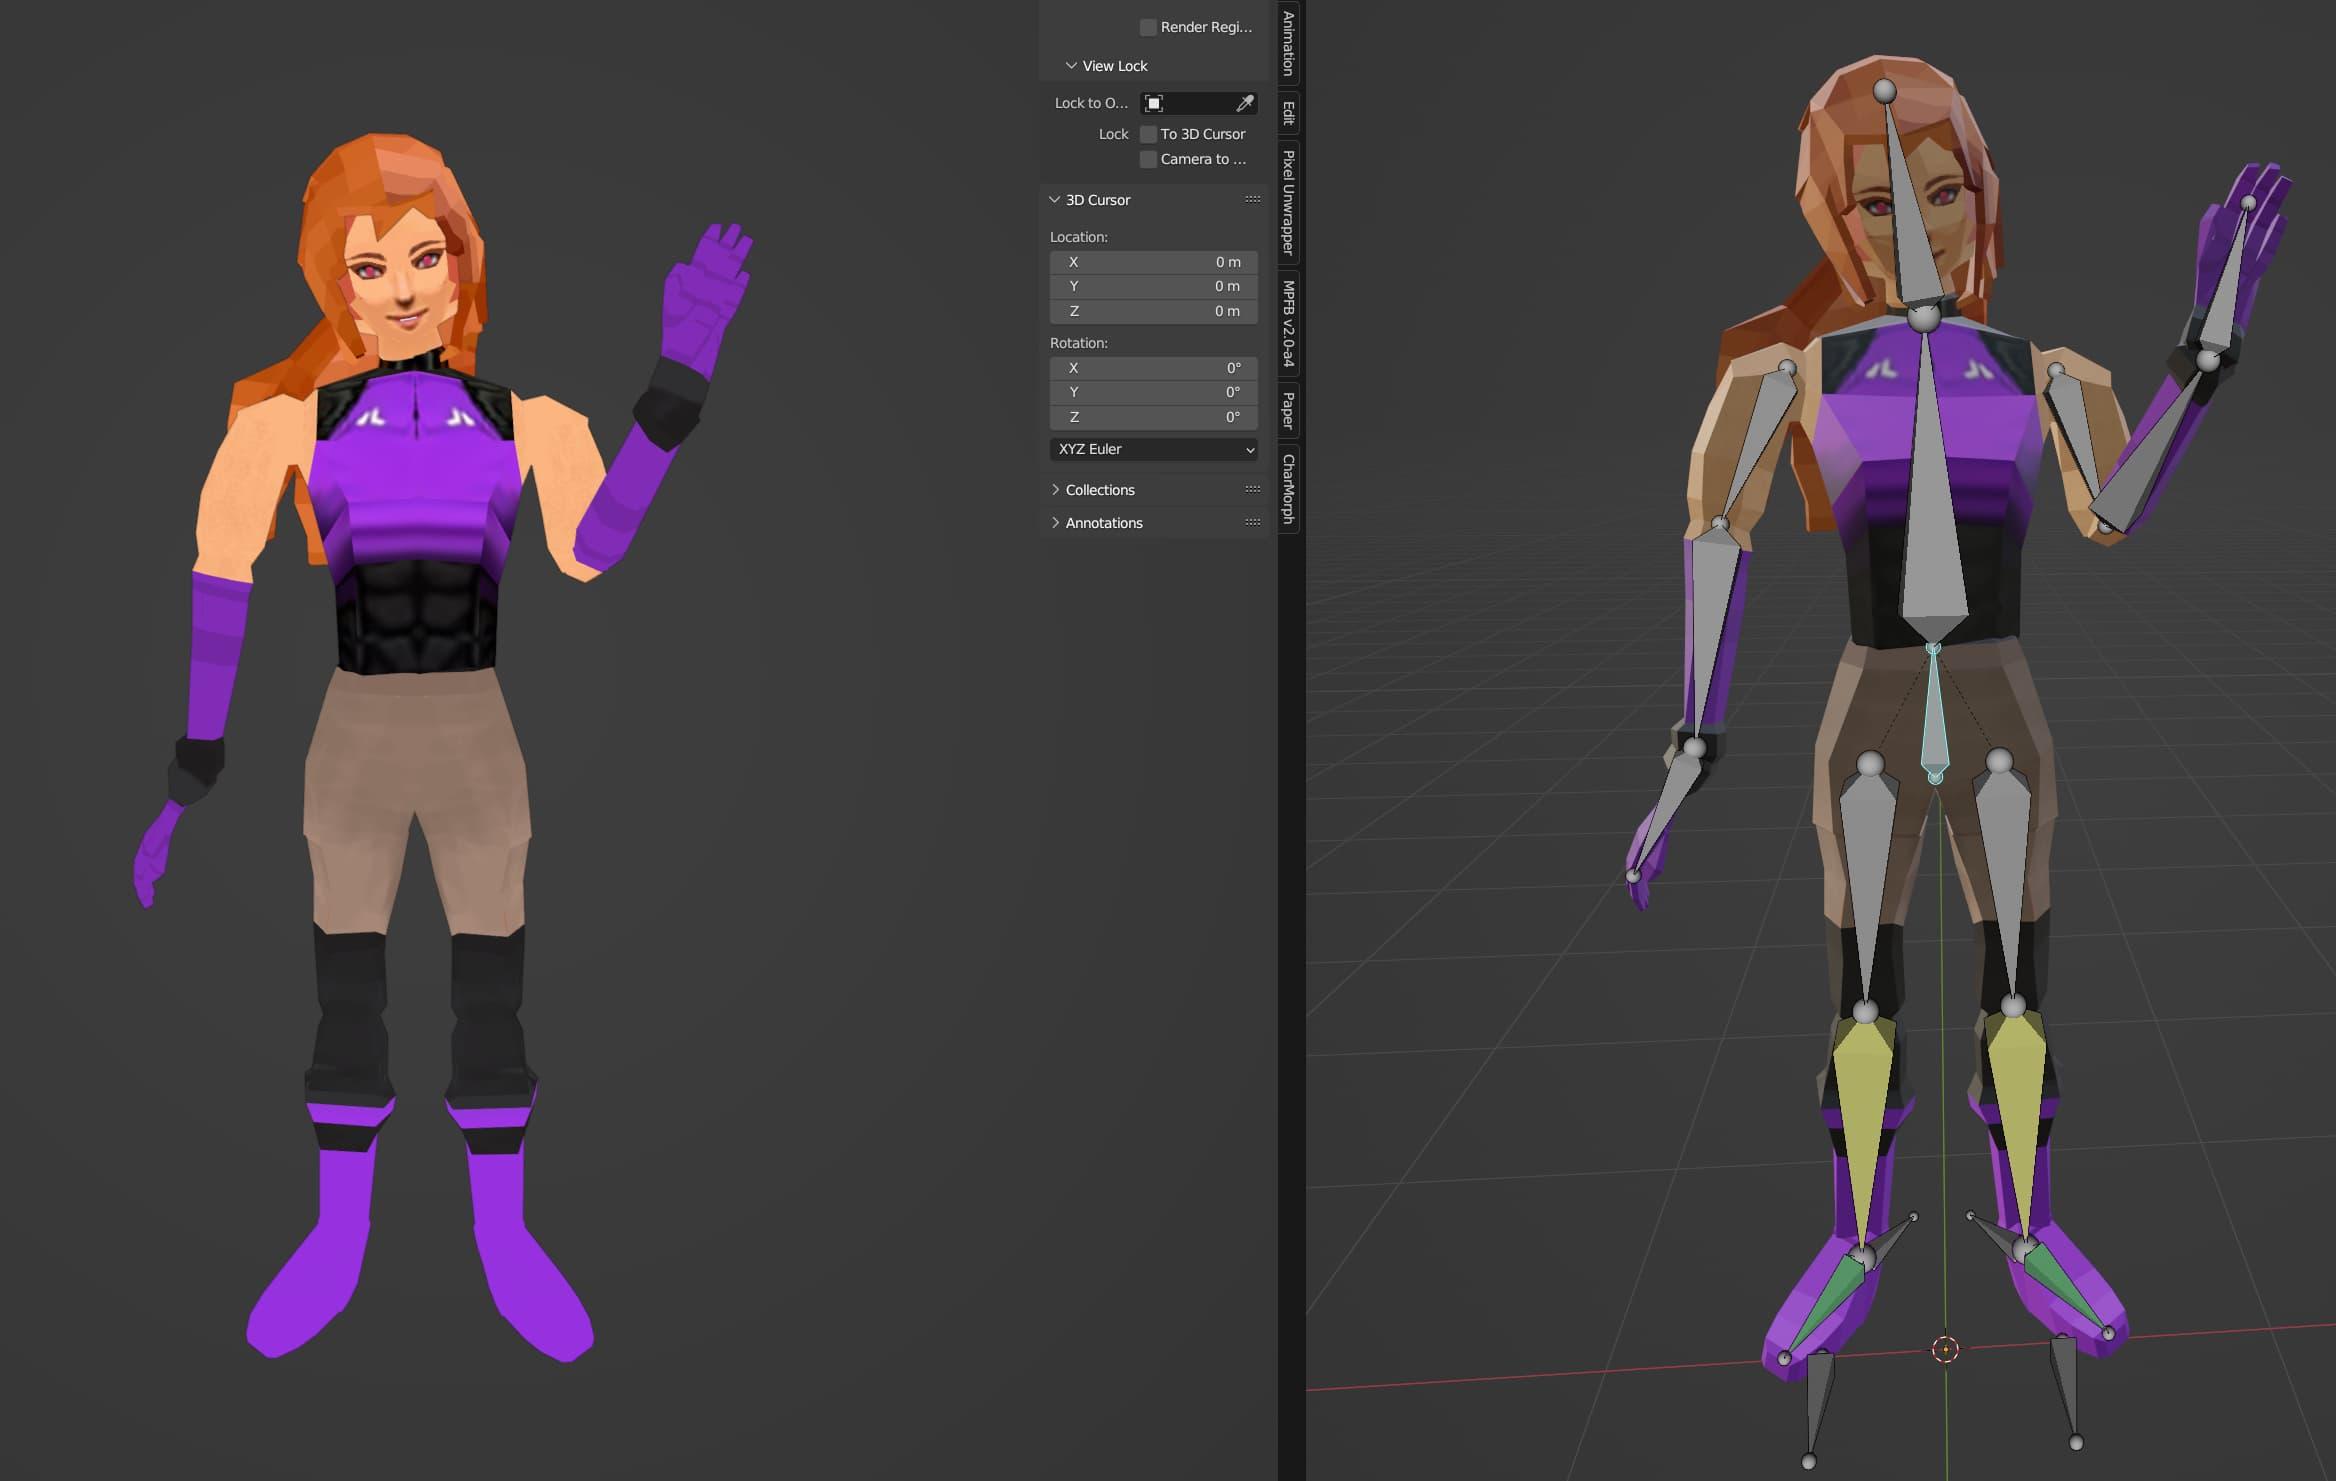 A screenshot from Blender, showing a low-poly female character on the left and right sides of the screen. On the left side, the character is in a waving pose, and on the right side, the individual bones or joints are visible